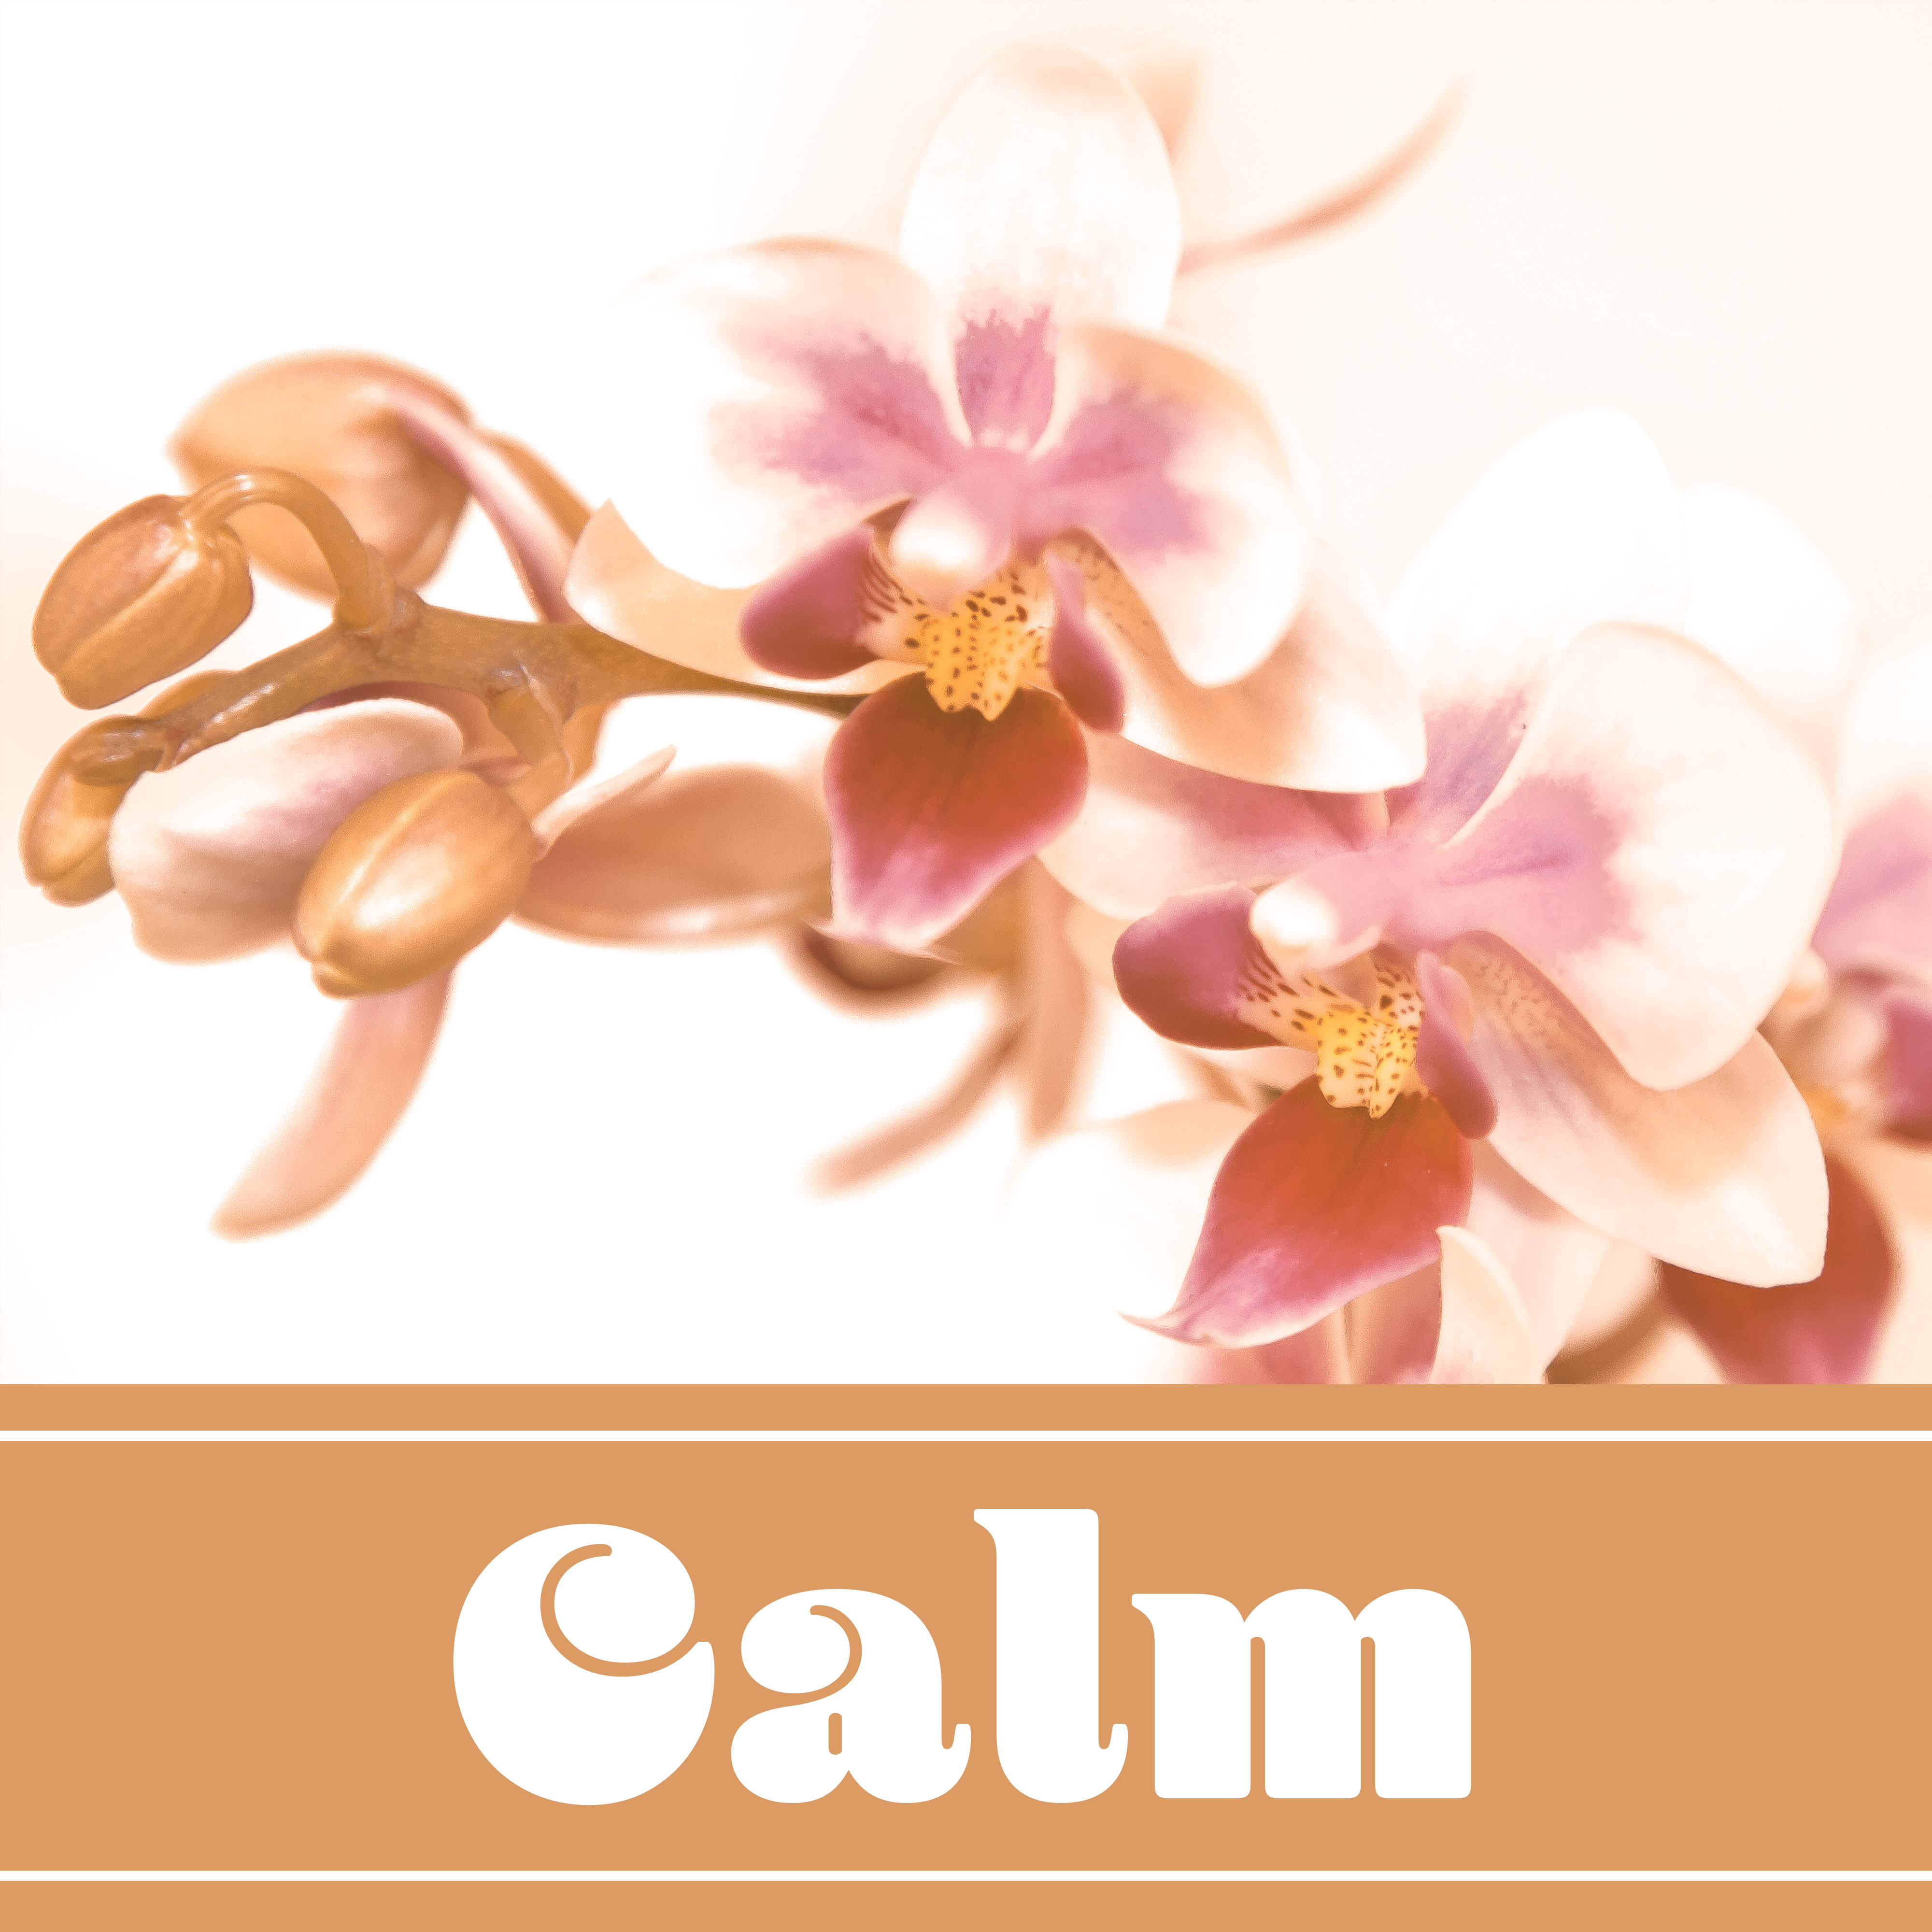 Calm  New Age, Music for Relaxation, Meditation Music, Calming Songs for Massage, Relax Trip